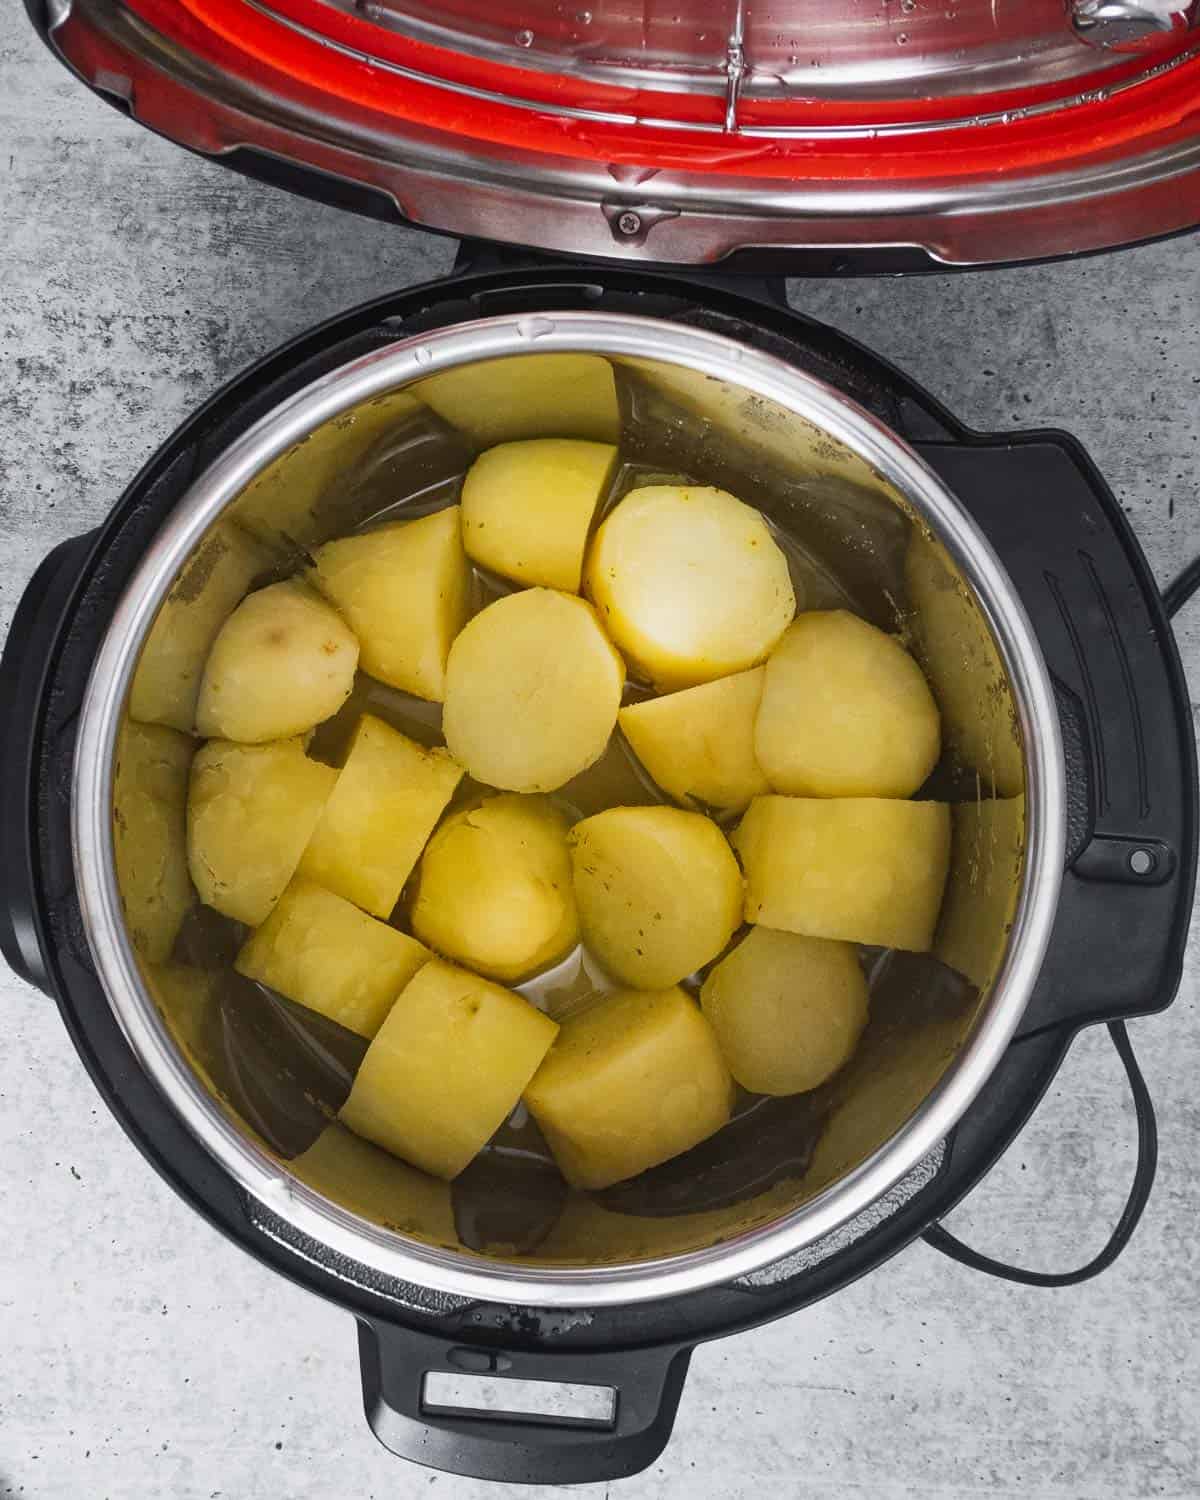 Cooked russet potatoes inside an Instant Pot.